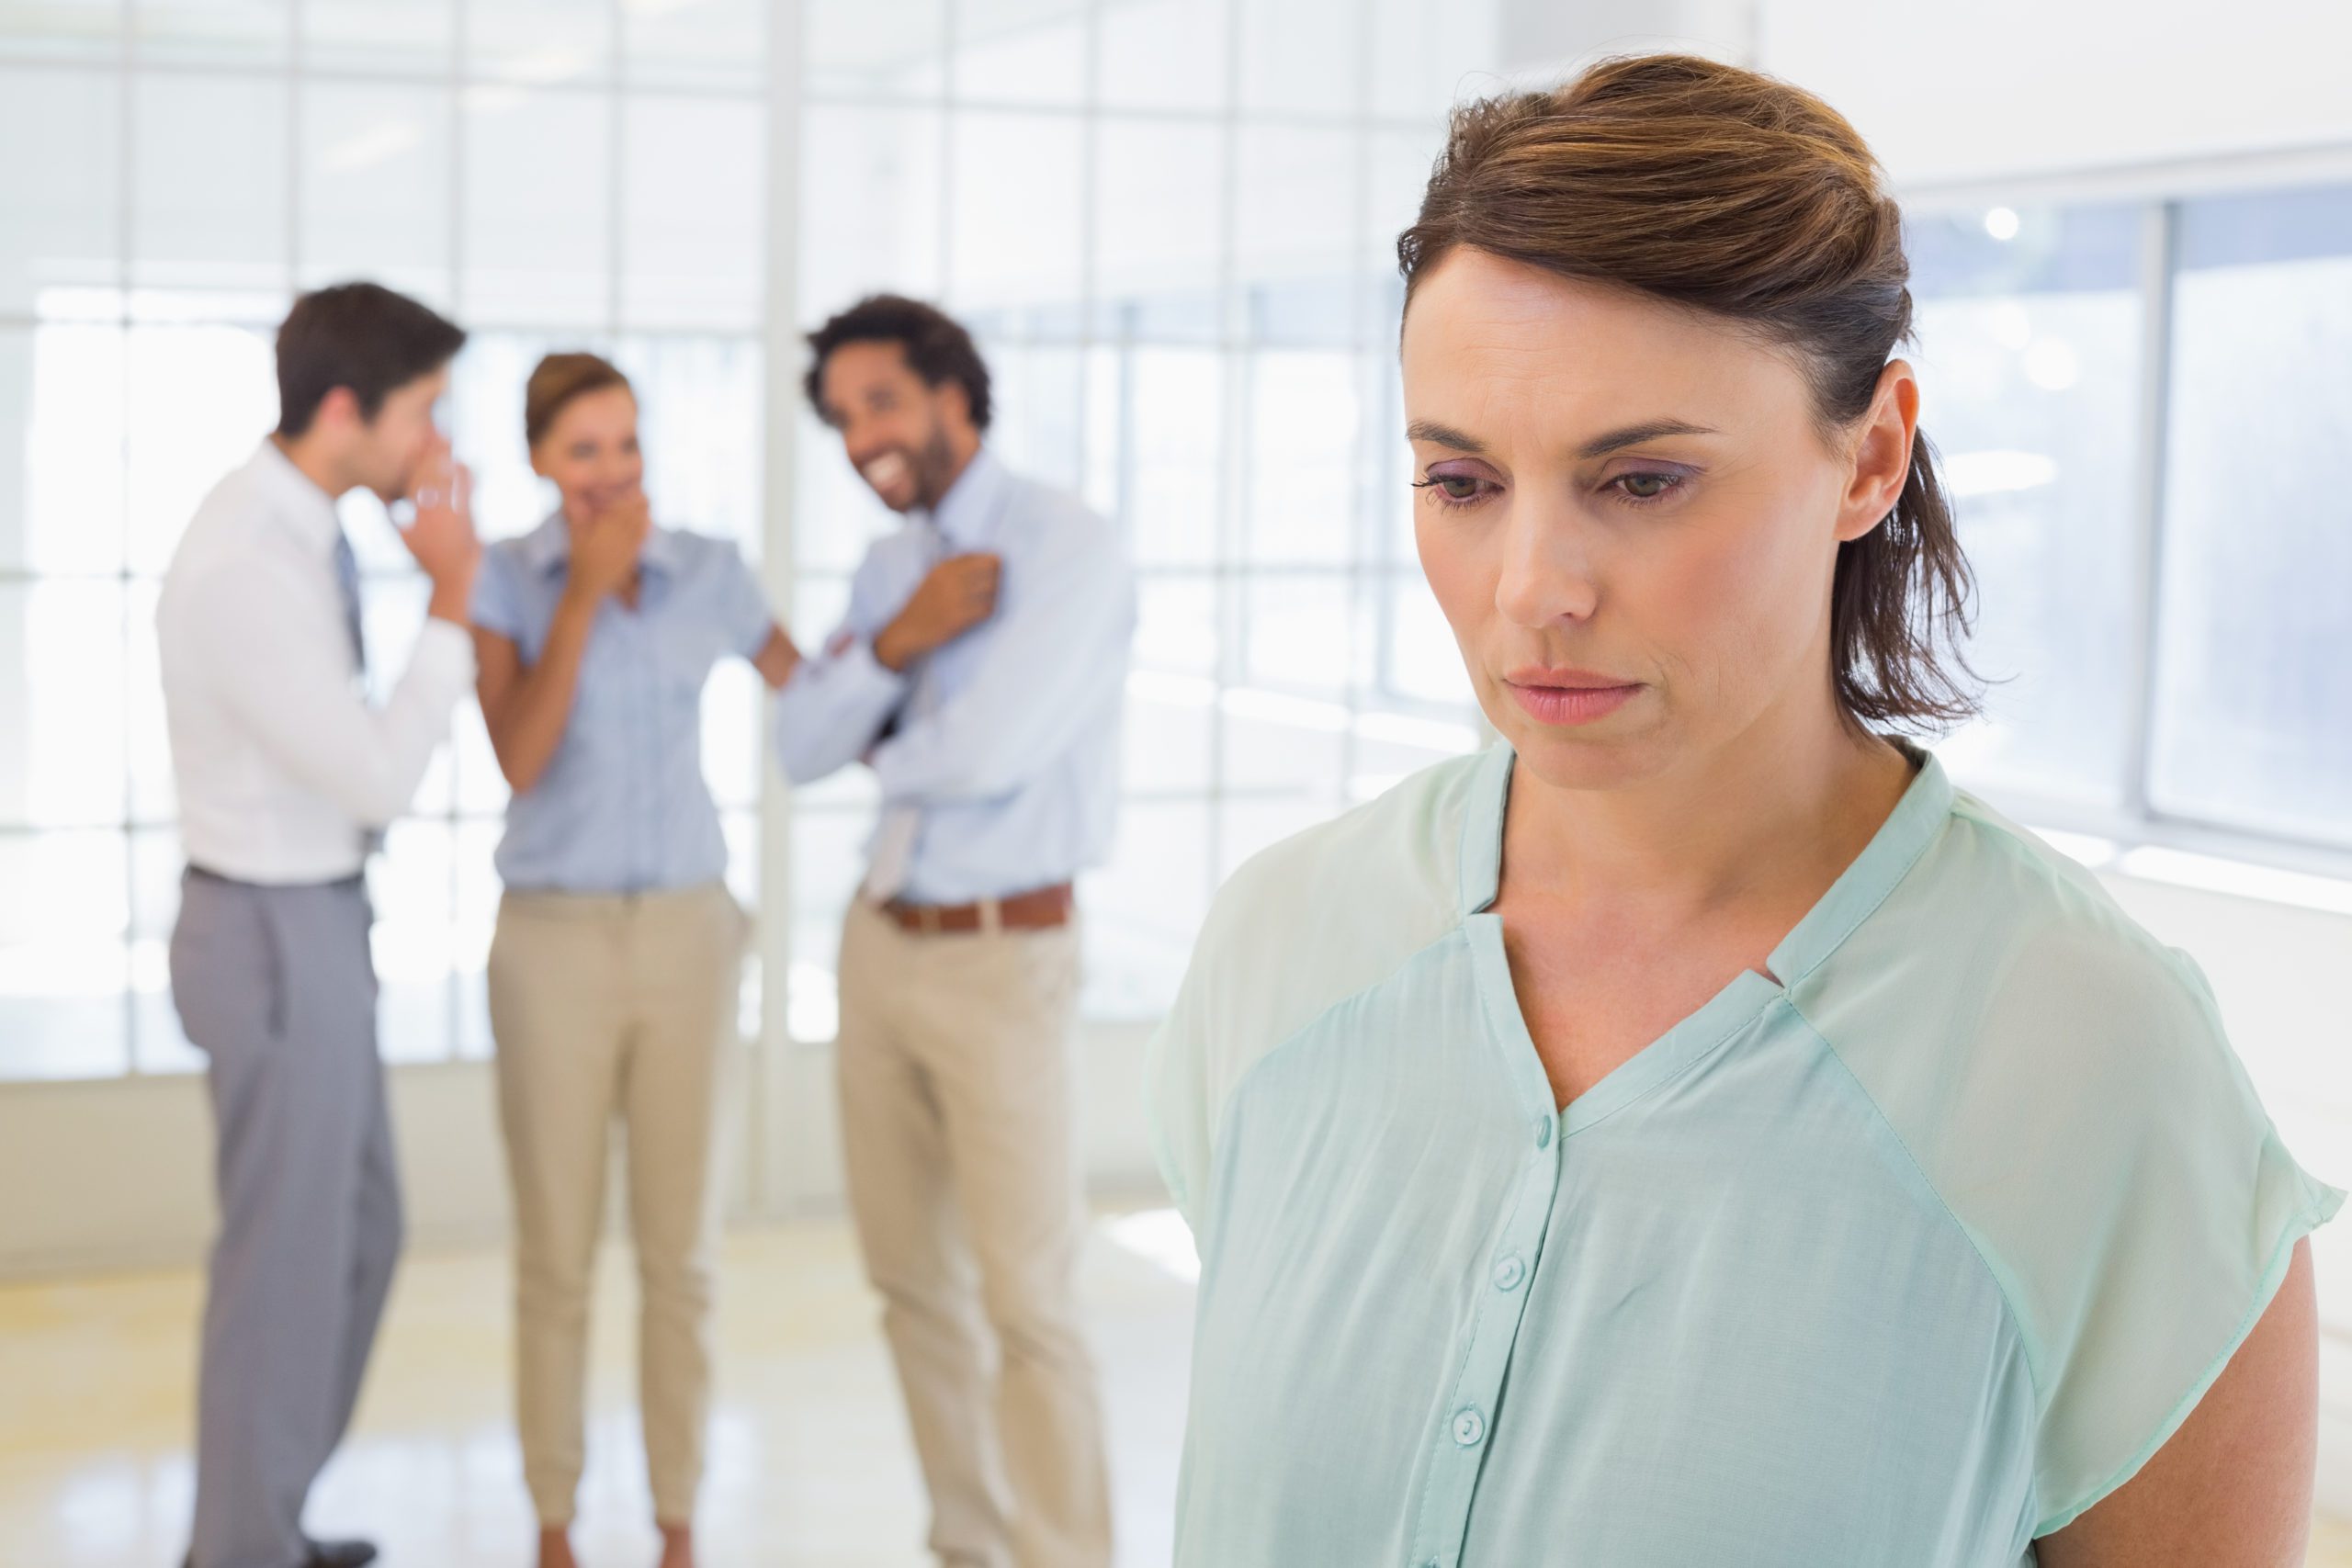 What Constitutes Workplace Bullying?